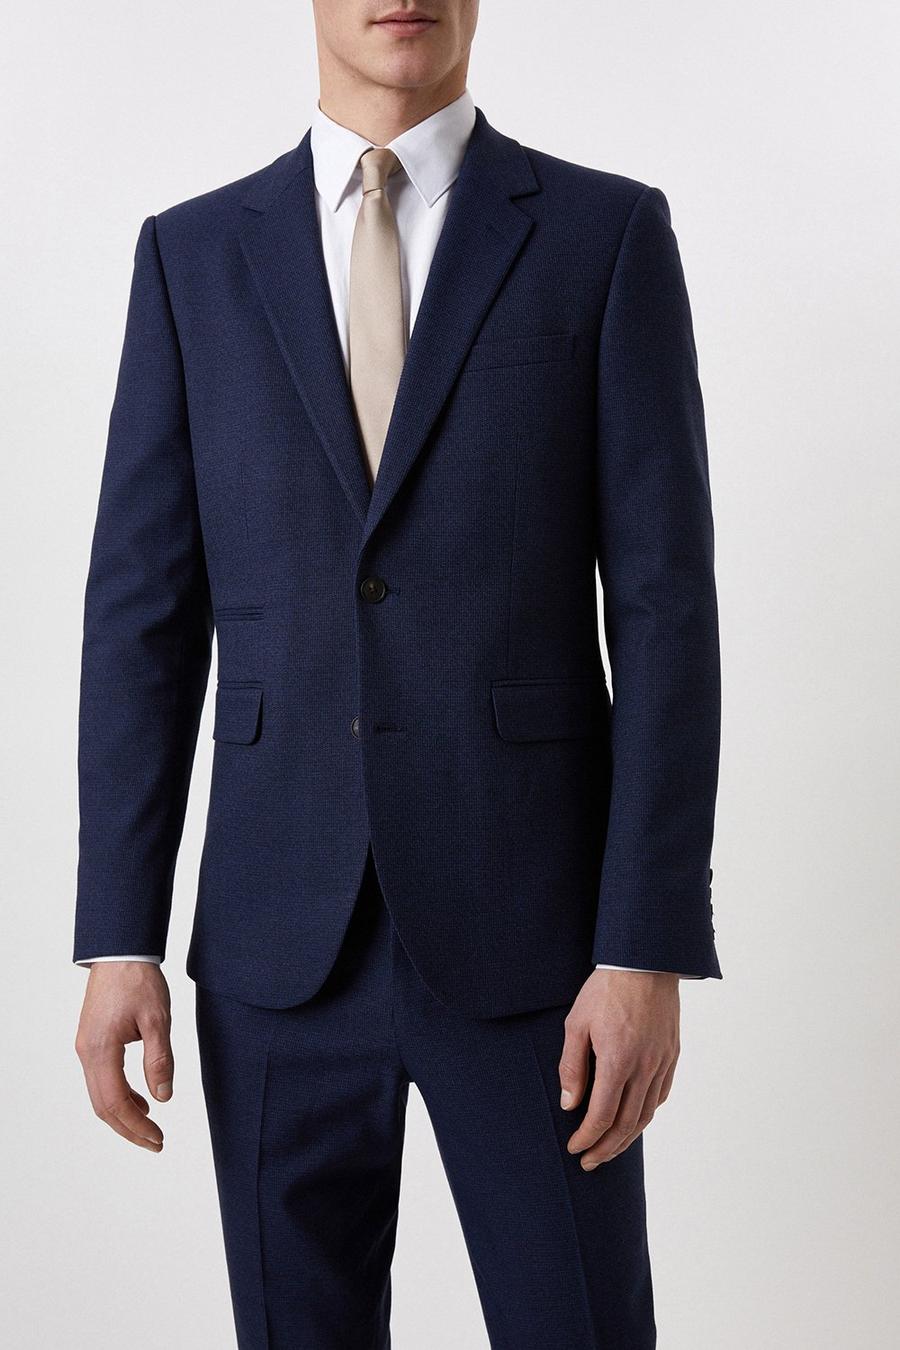 Plus And Tall Slim Fit Navy Marl Three-Piece Suit